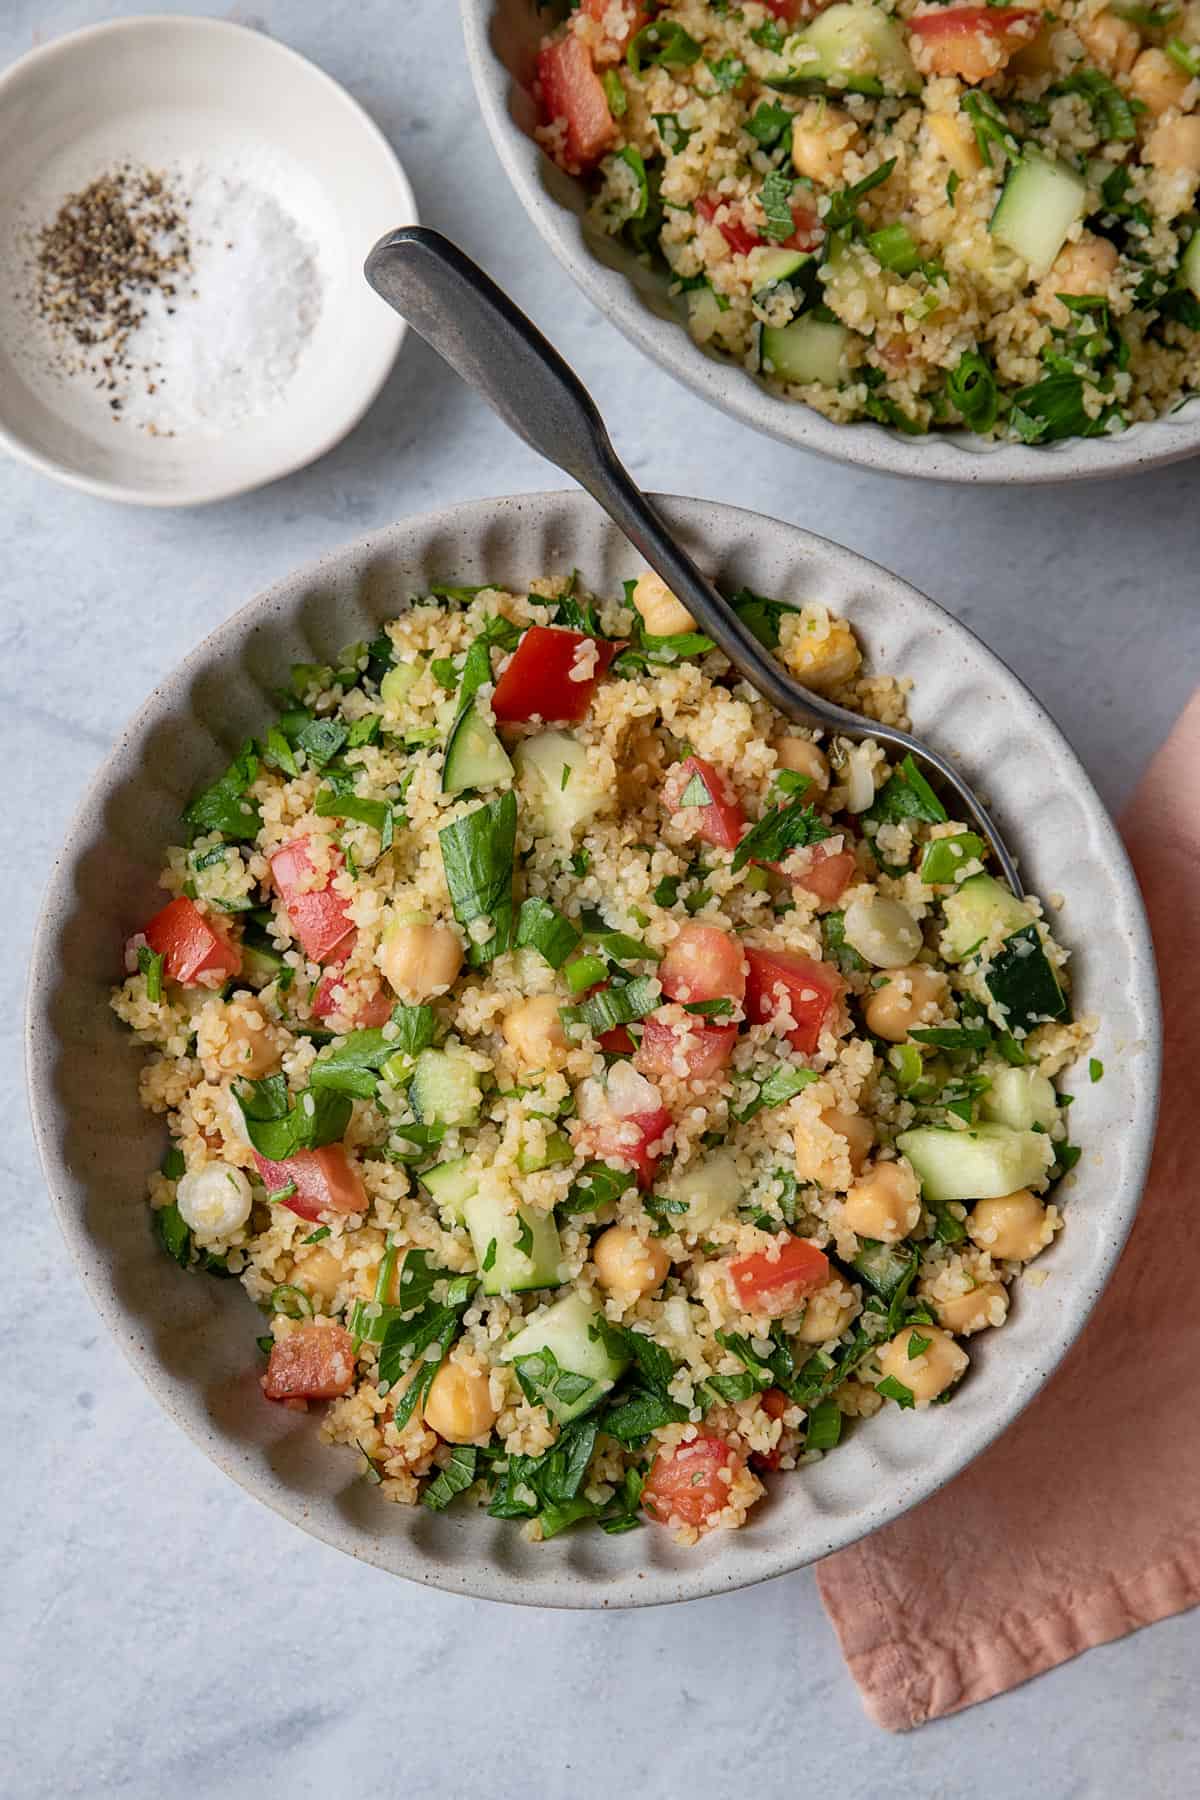 Two bowls of the bulgur chickpea salad with pinch bowl next to them